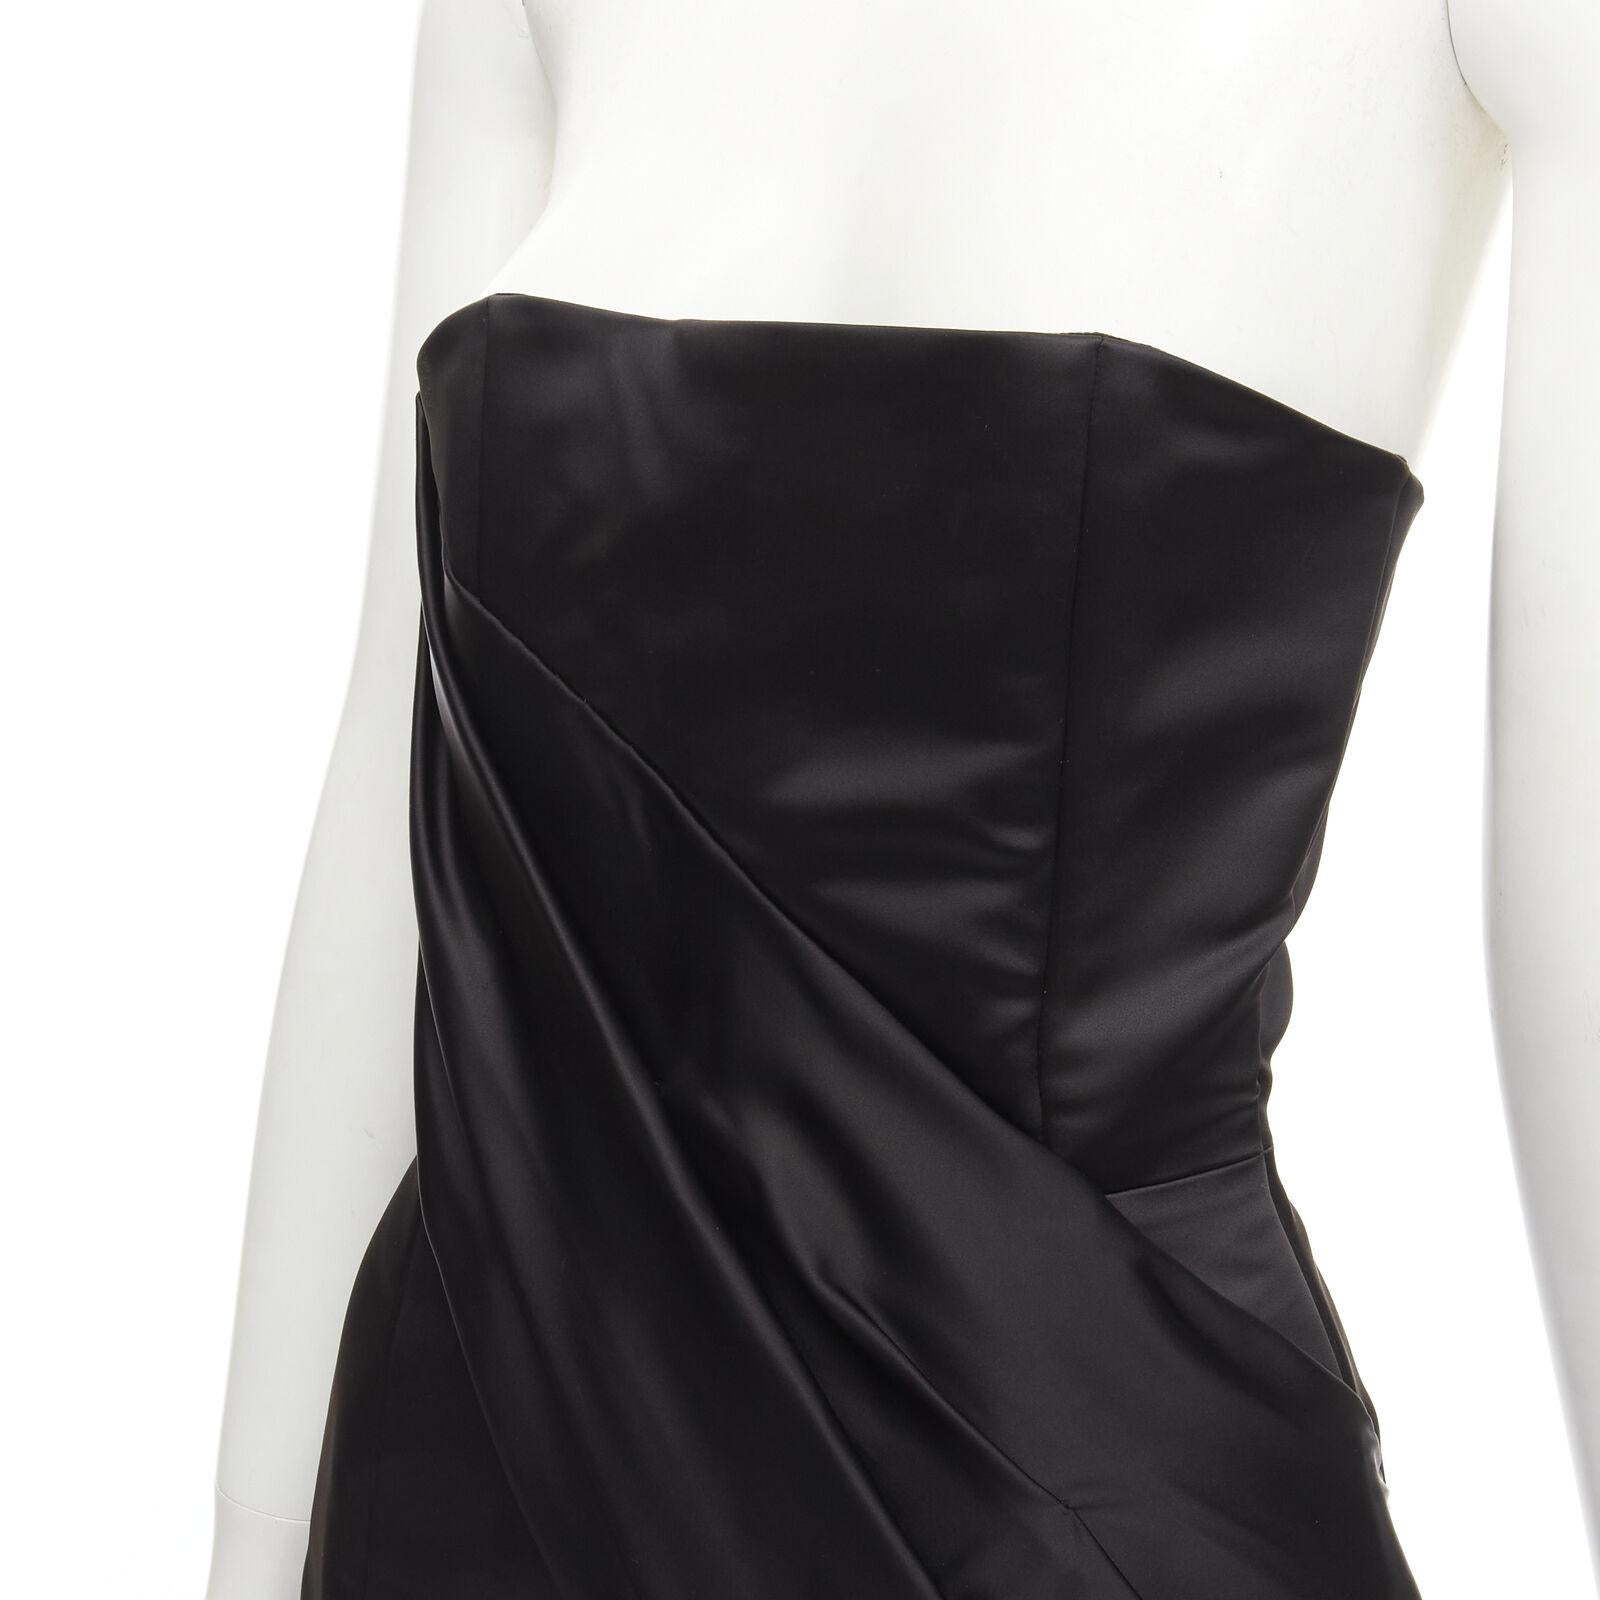 HALPERN black satin asymmetric draped bustier bodice mini dress FR36 XS
Reference: AAWC/A00145
Brand: Halpern
Material: Polyester
Color: Black
Pattern: Solid
Closure: Zip
Lining: Fully Lined
Extra Details: Boned bodice. Fitted contoured mini dress